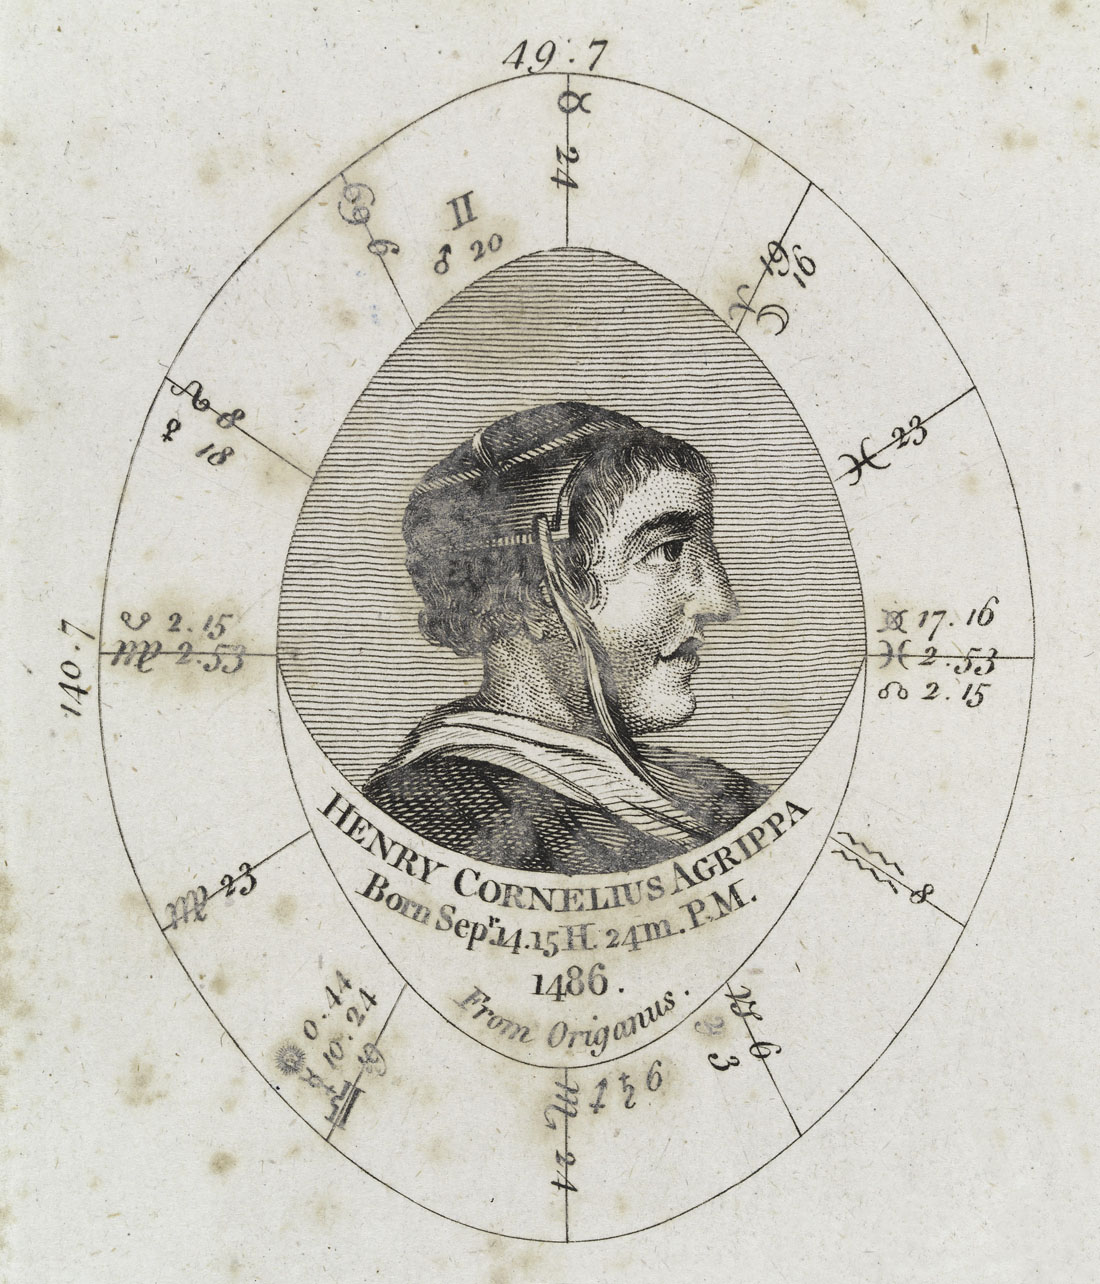 L0040343 Astrological birth chart for Henry Cornelius Agrippa Credit: Wellcome Library, London. Wellcome Images images@wellcome.ac.uk http://wellcomeimages.org Astrological birth chart for Henry Cornelius Agrippa Copperplate 18th century A new and complete illustration of the celestial science of astrology Ebenezer Sibly Published: ca. 1790 Copyrighted work available under Creative Commons Attribution only licence CC BY 4.0 http://creativecommons.org/licenses/by/4.0/